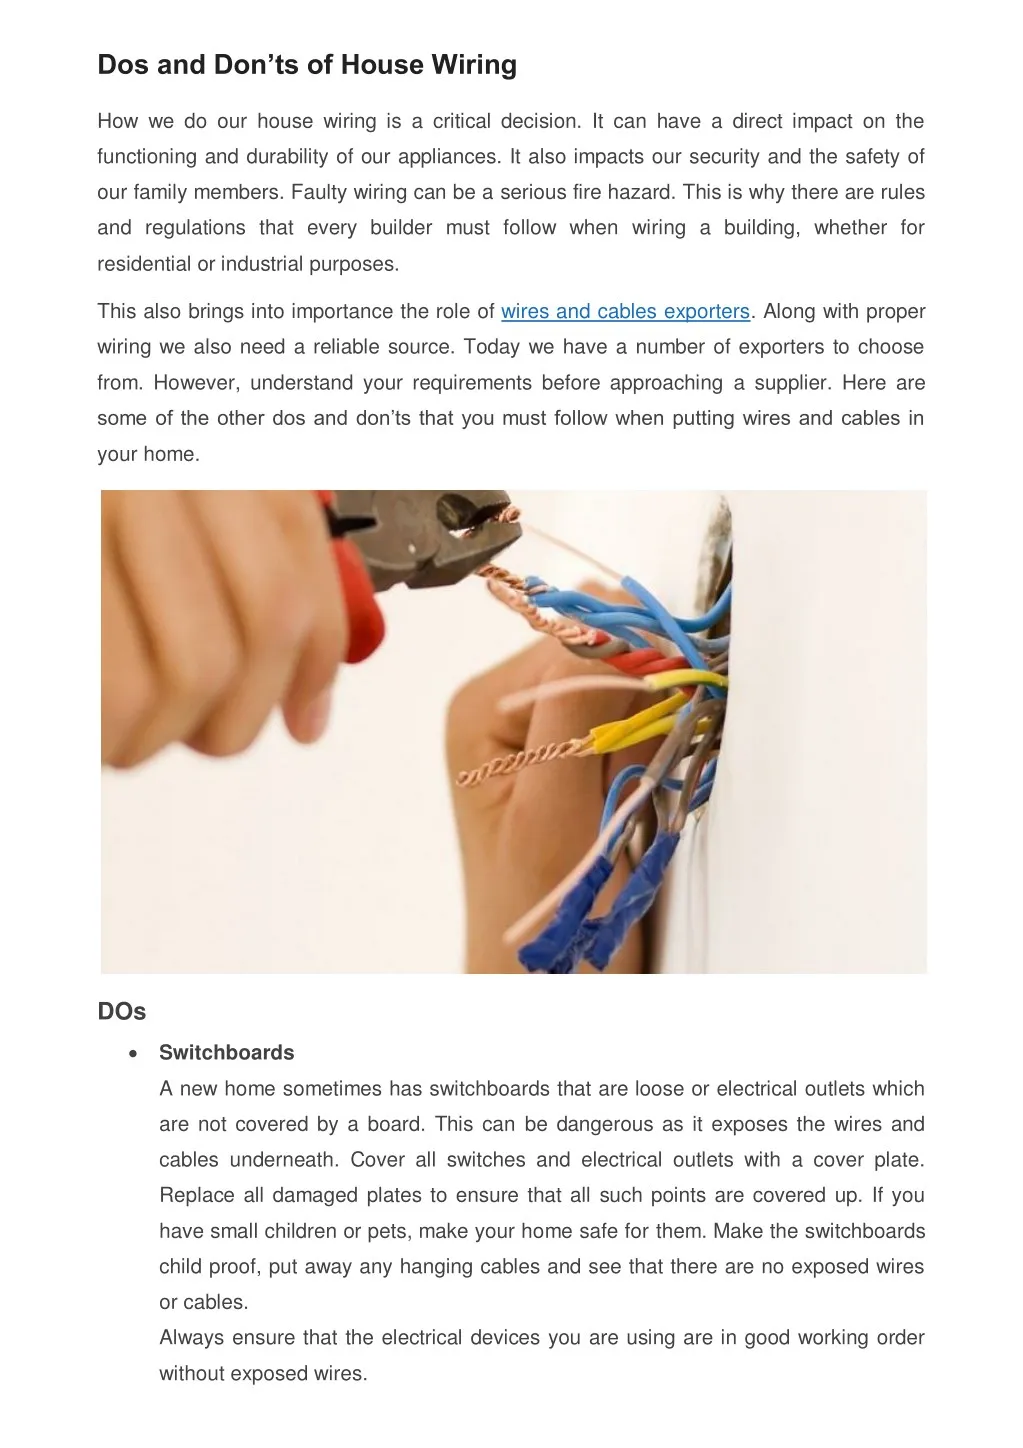 dos and don ts of house wiring